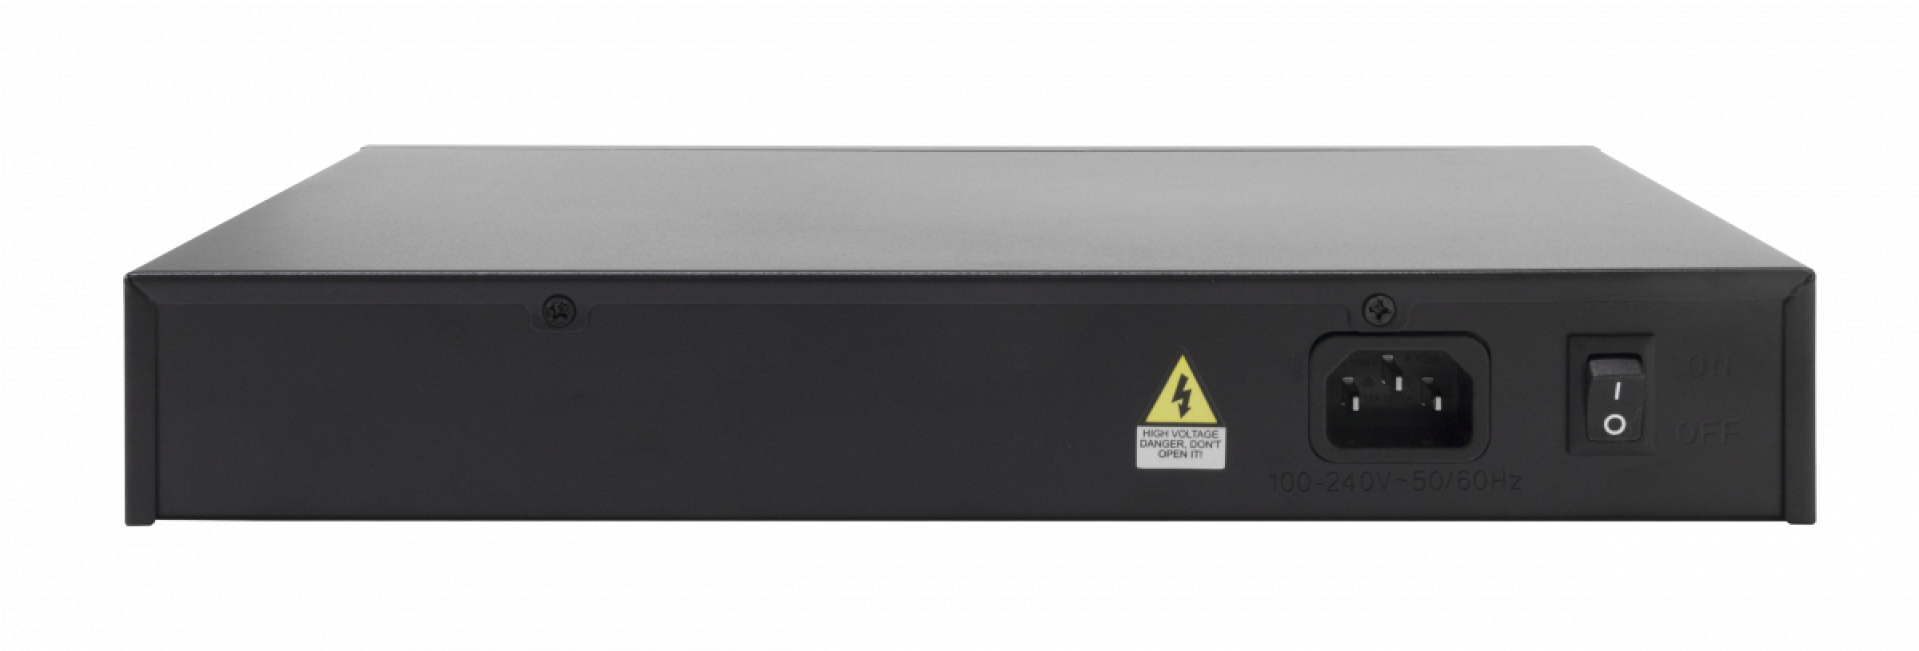 Gigabit WLAN controller for up to 128 APs